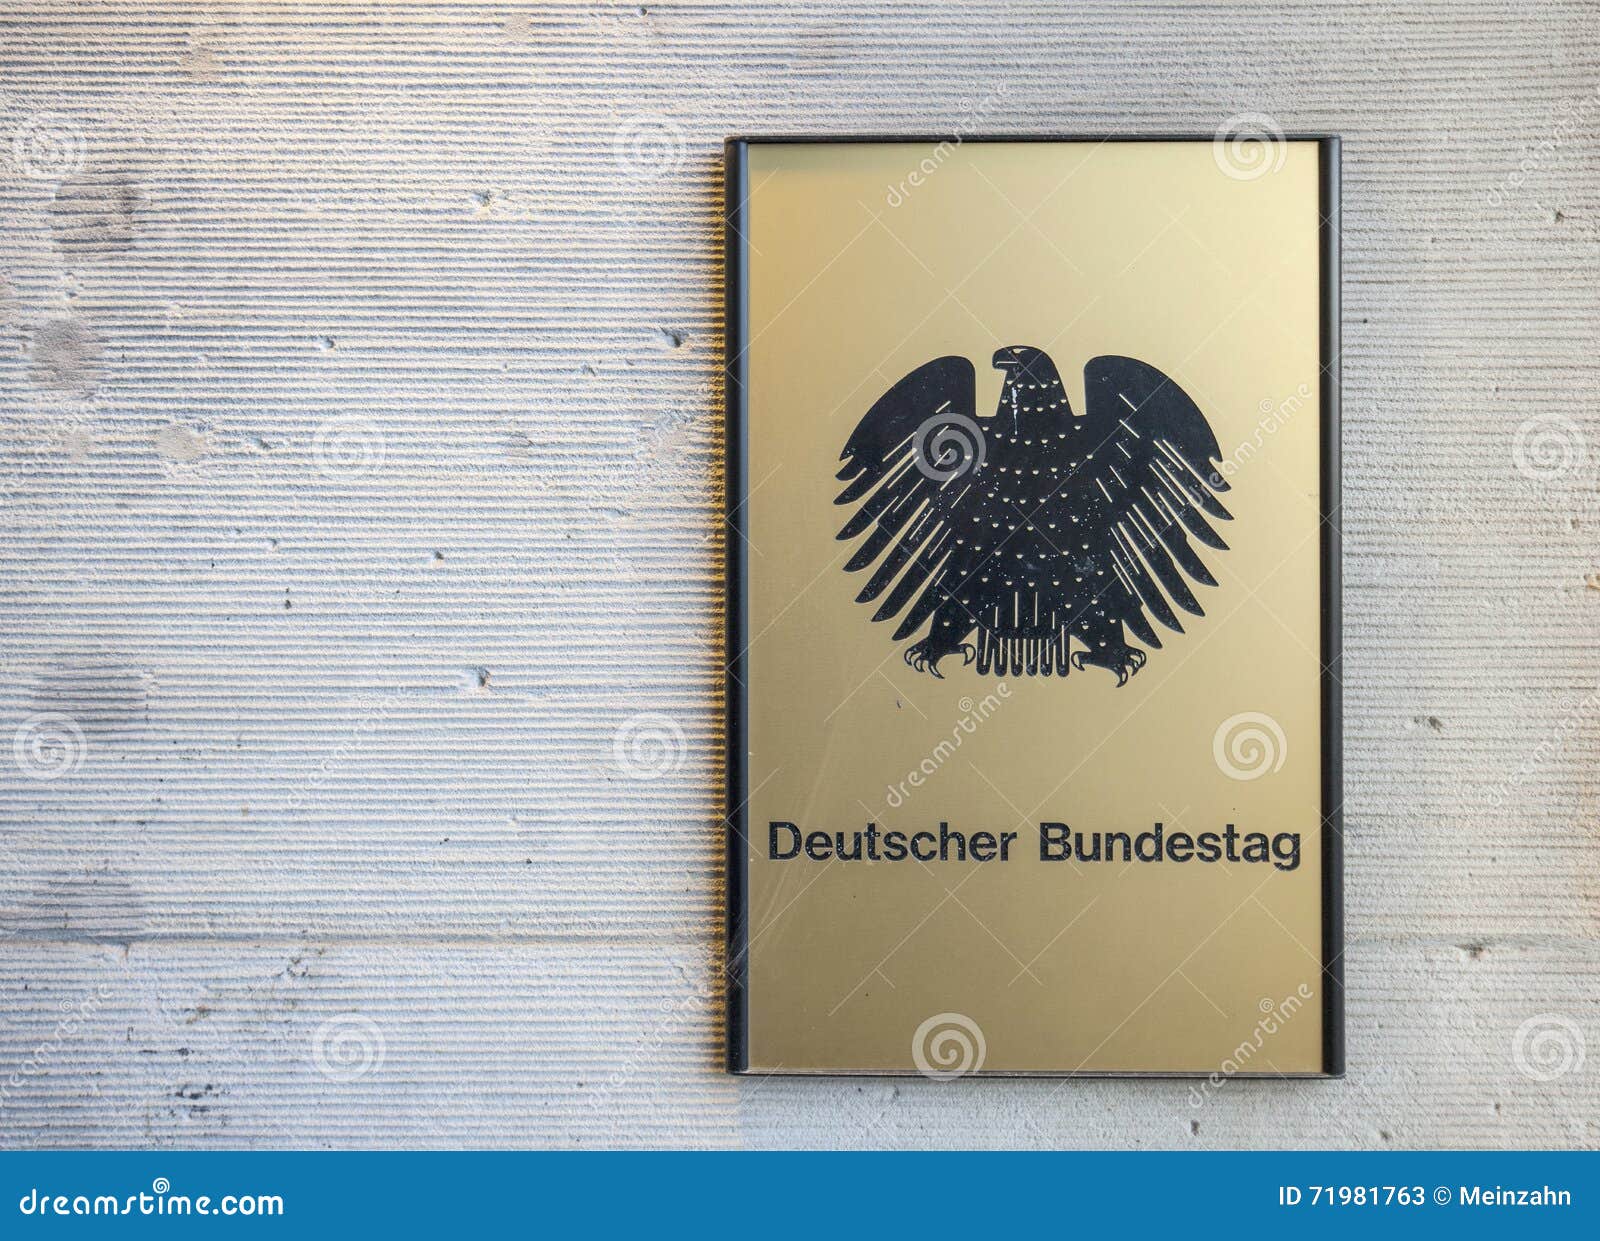 Government Of Germany Deutscher Bundestag The Plate With Inscription On The Wall Editorial Stock Photo Image Of Metal German 71981763